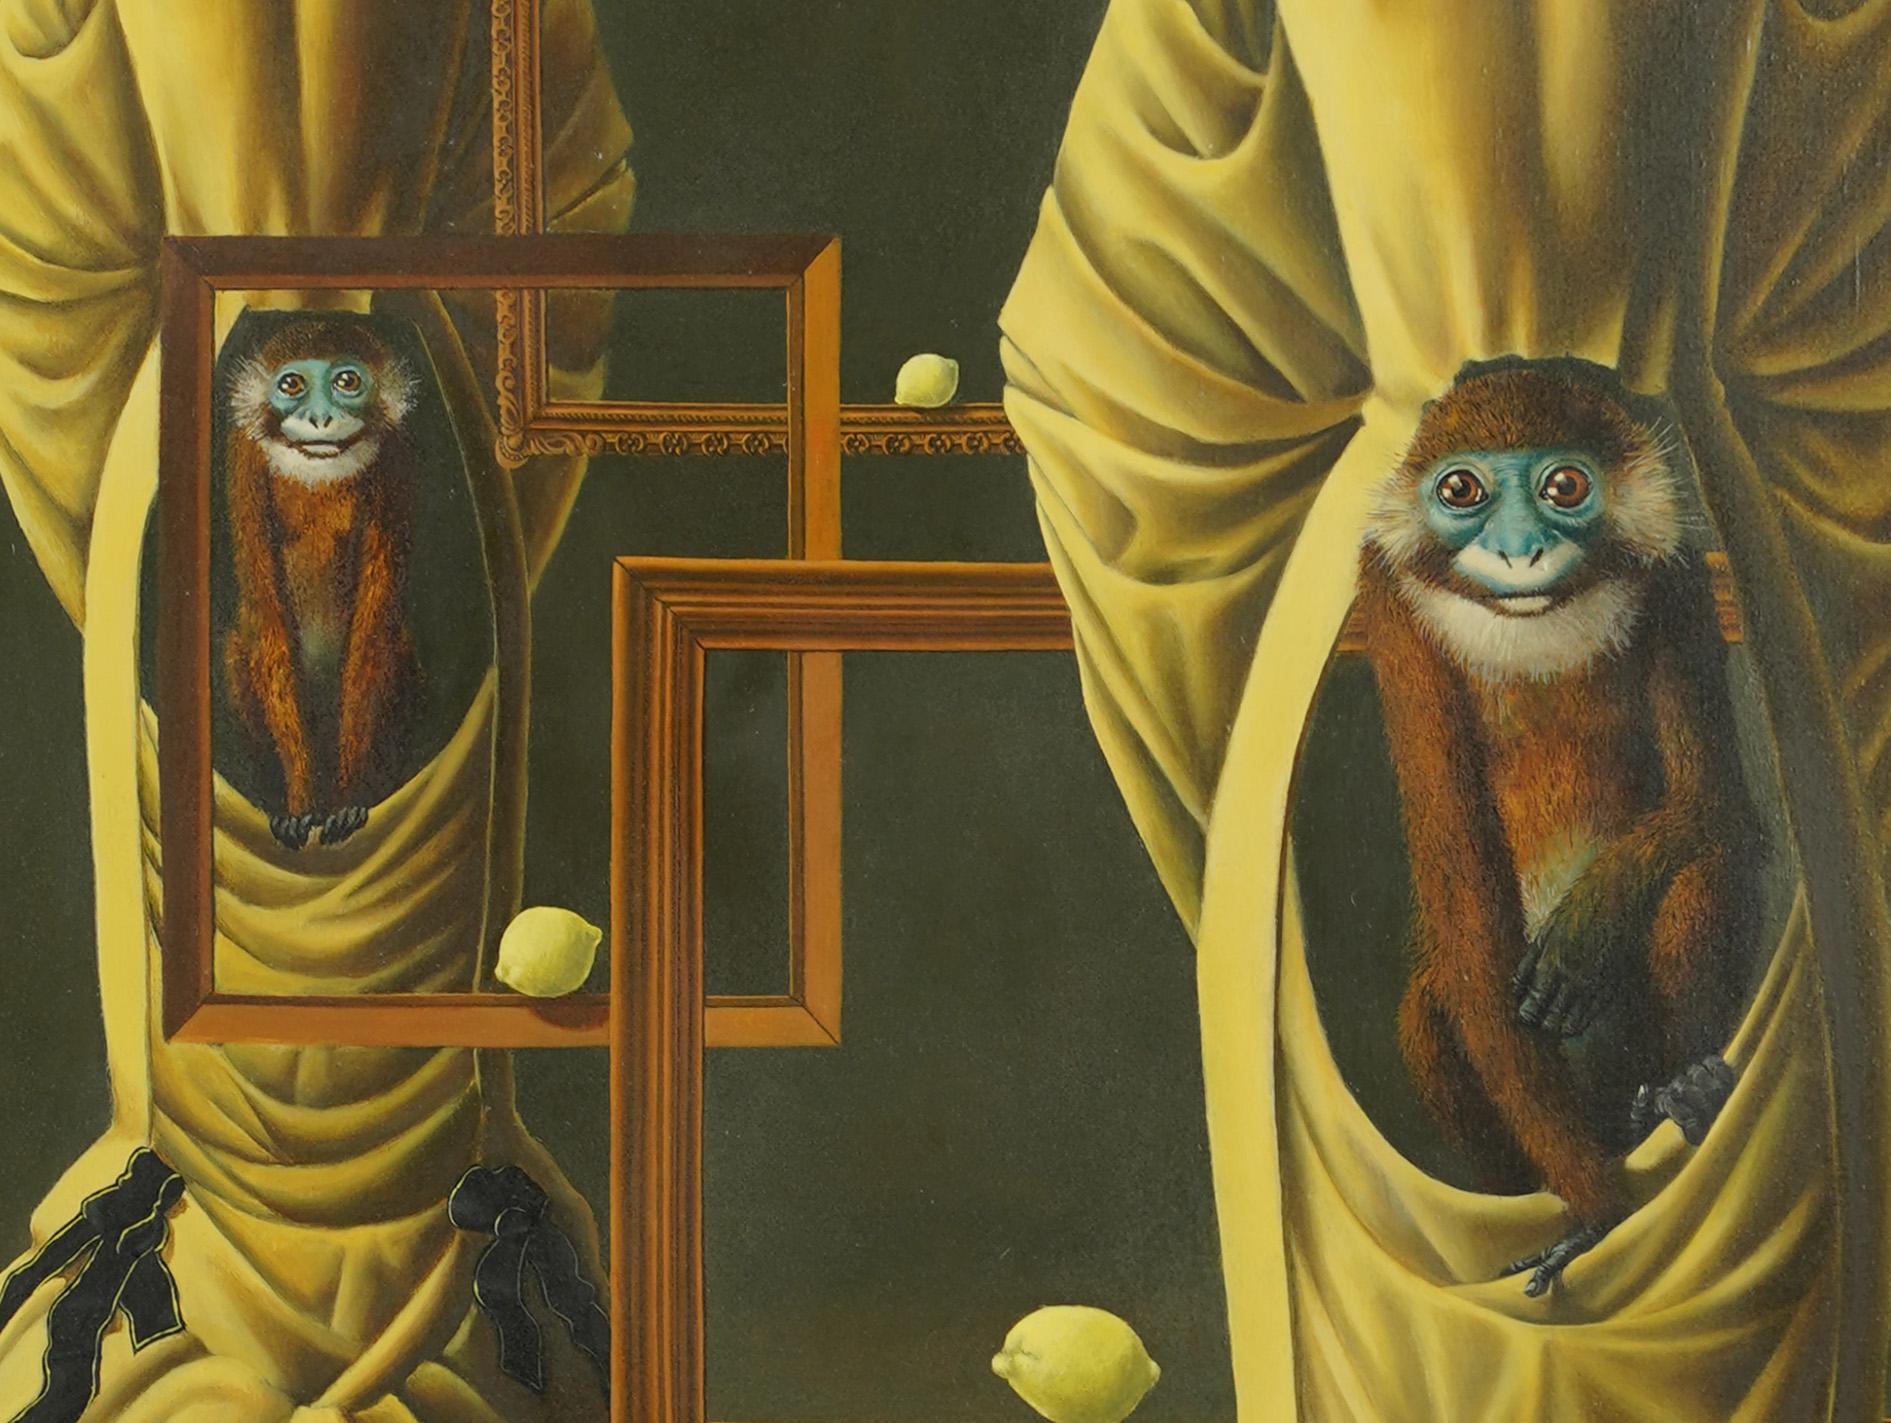 Antique American modernist interior scene with two monkeys.  Oil on canvas.  No signature found.  Framed.  Image size, 39H x 26L.